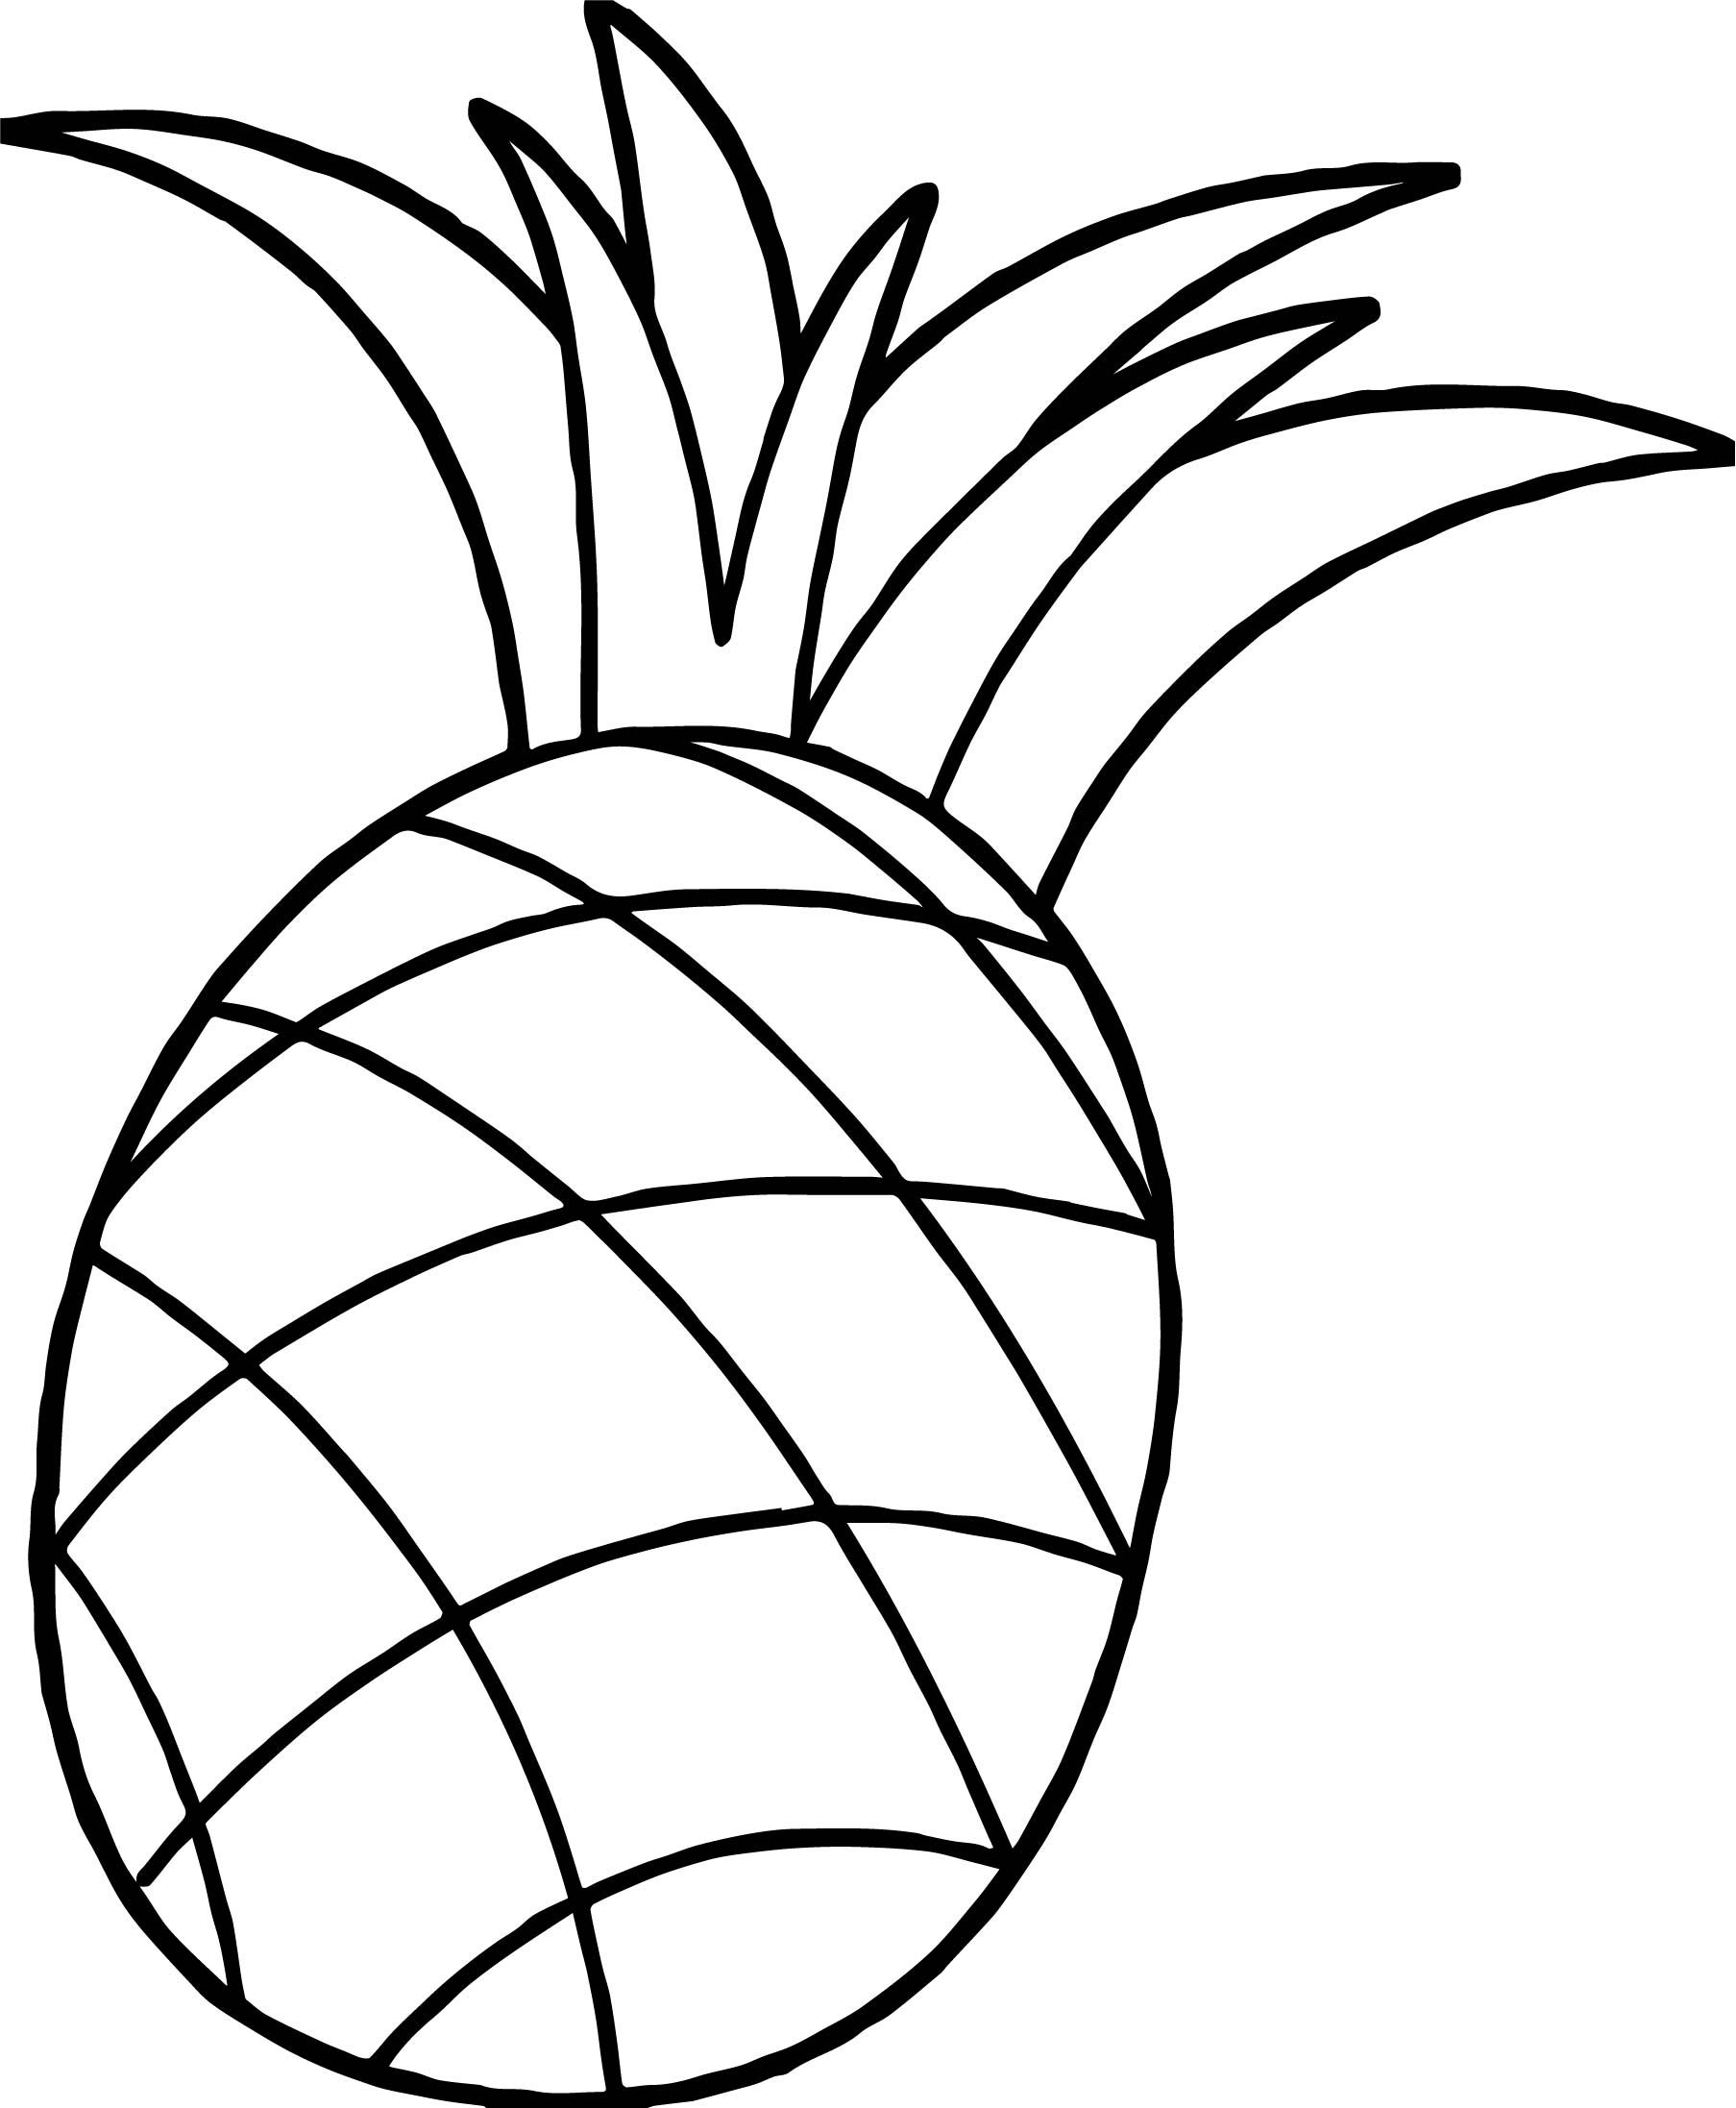 Coloring pages pineapples coloring pages